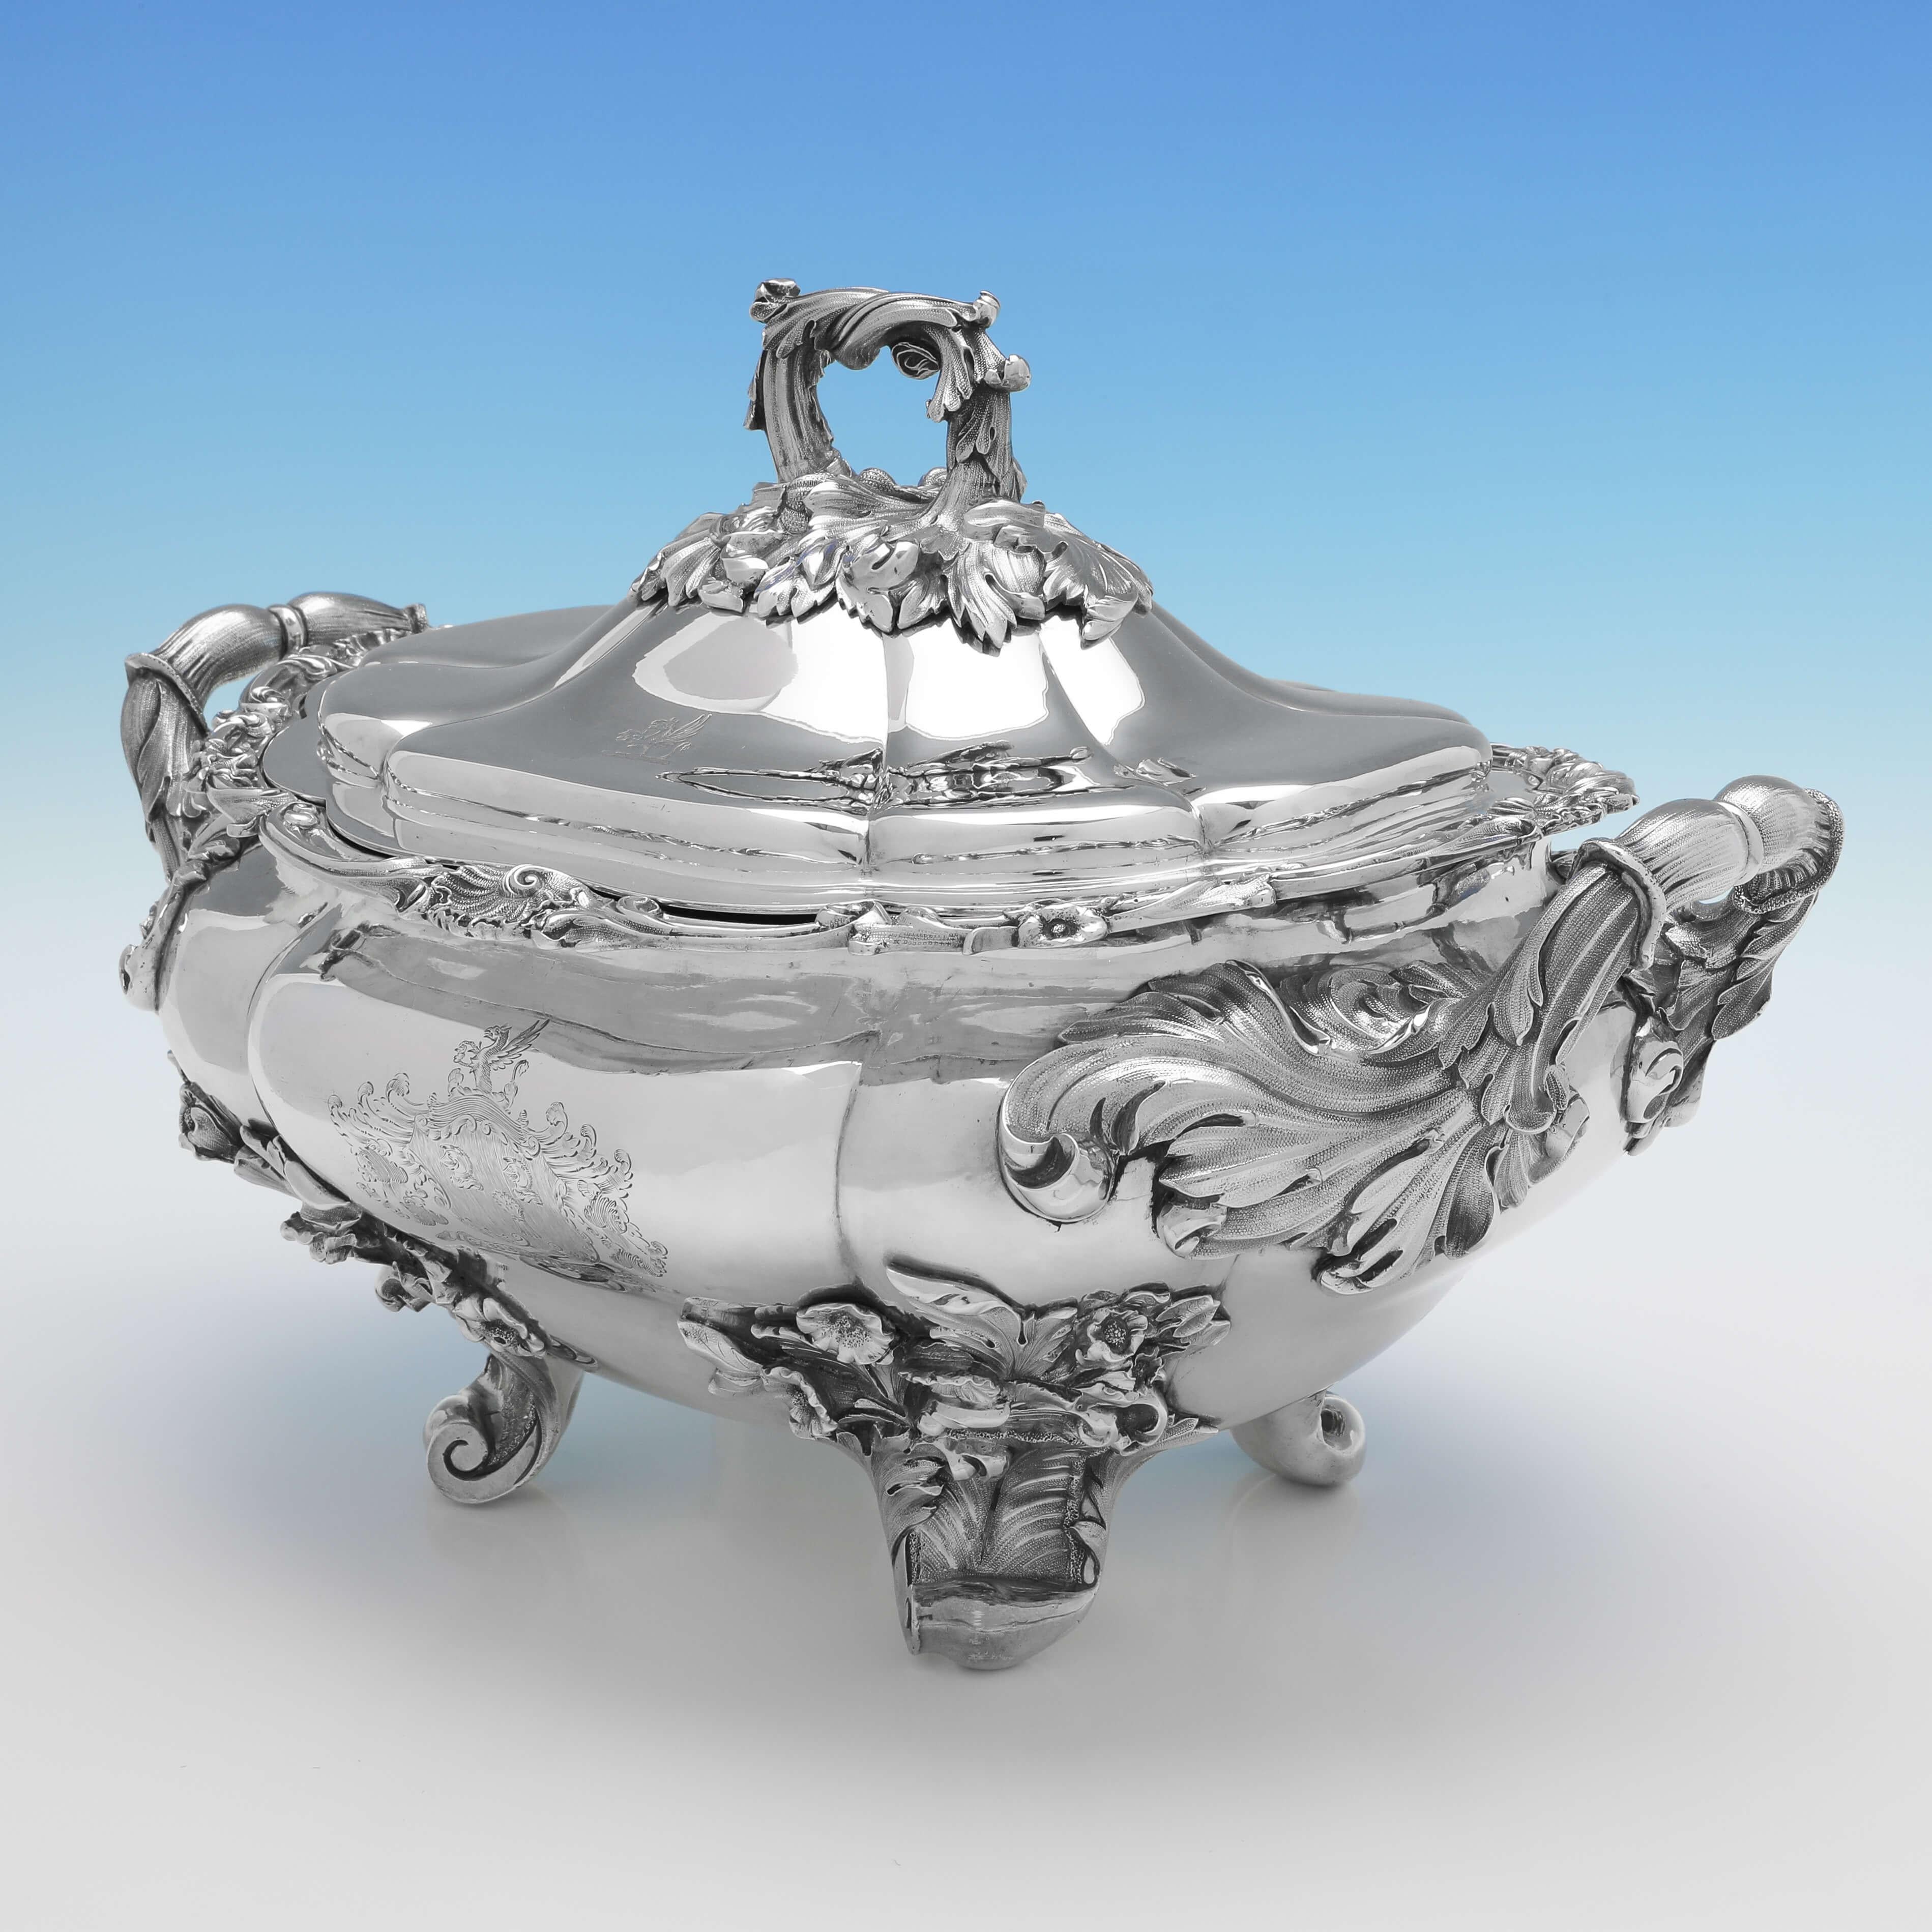 Hallmarked in London in 1827 by Benjamin Preston, this incredible, Antique Sterling Silver Soup Tureen, is a masterpiece of the regency style, with cast and applied feet and handles, and an engraved coat of arms. The soup tureen measures 10.5